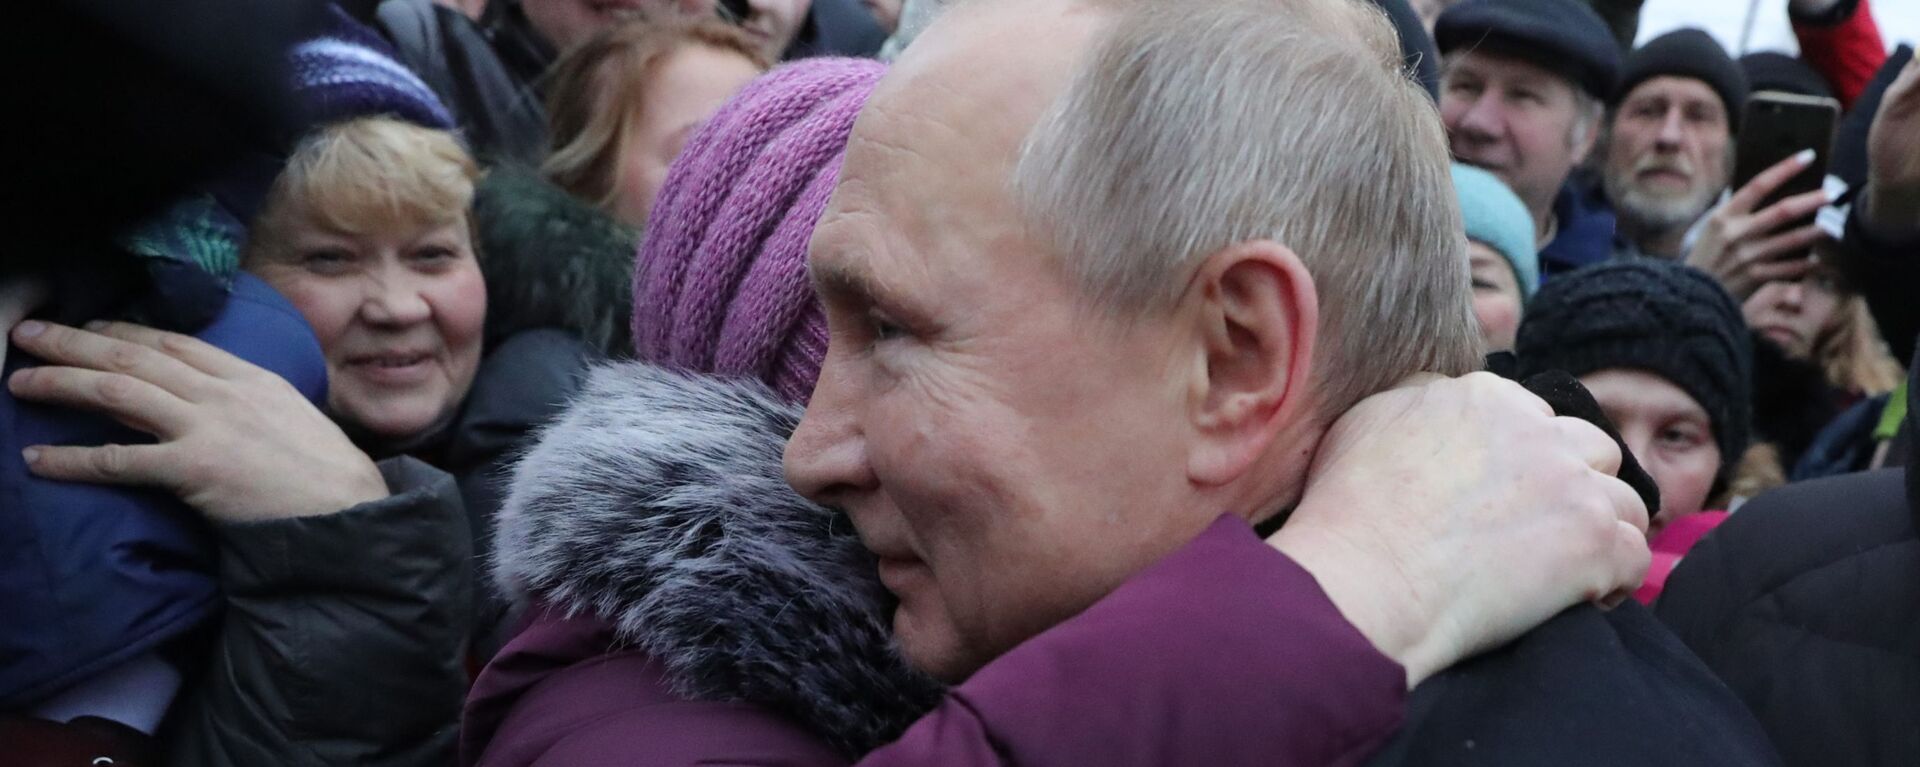 Russian President Vladimir Putin speaking to people after unveiling the monument to late Russian and Soviet writer and public figure Daniil Granin - Sputnik International, 1920, 30.11.2019